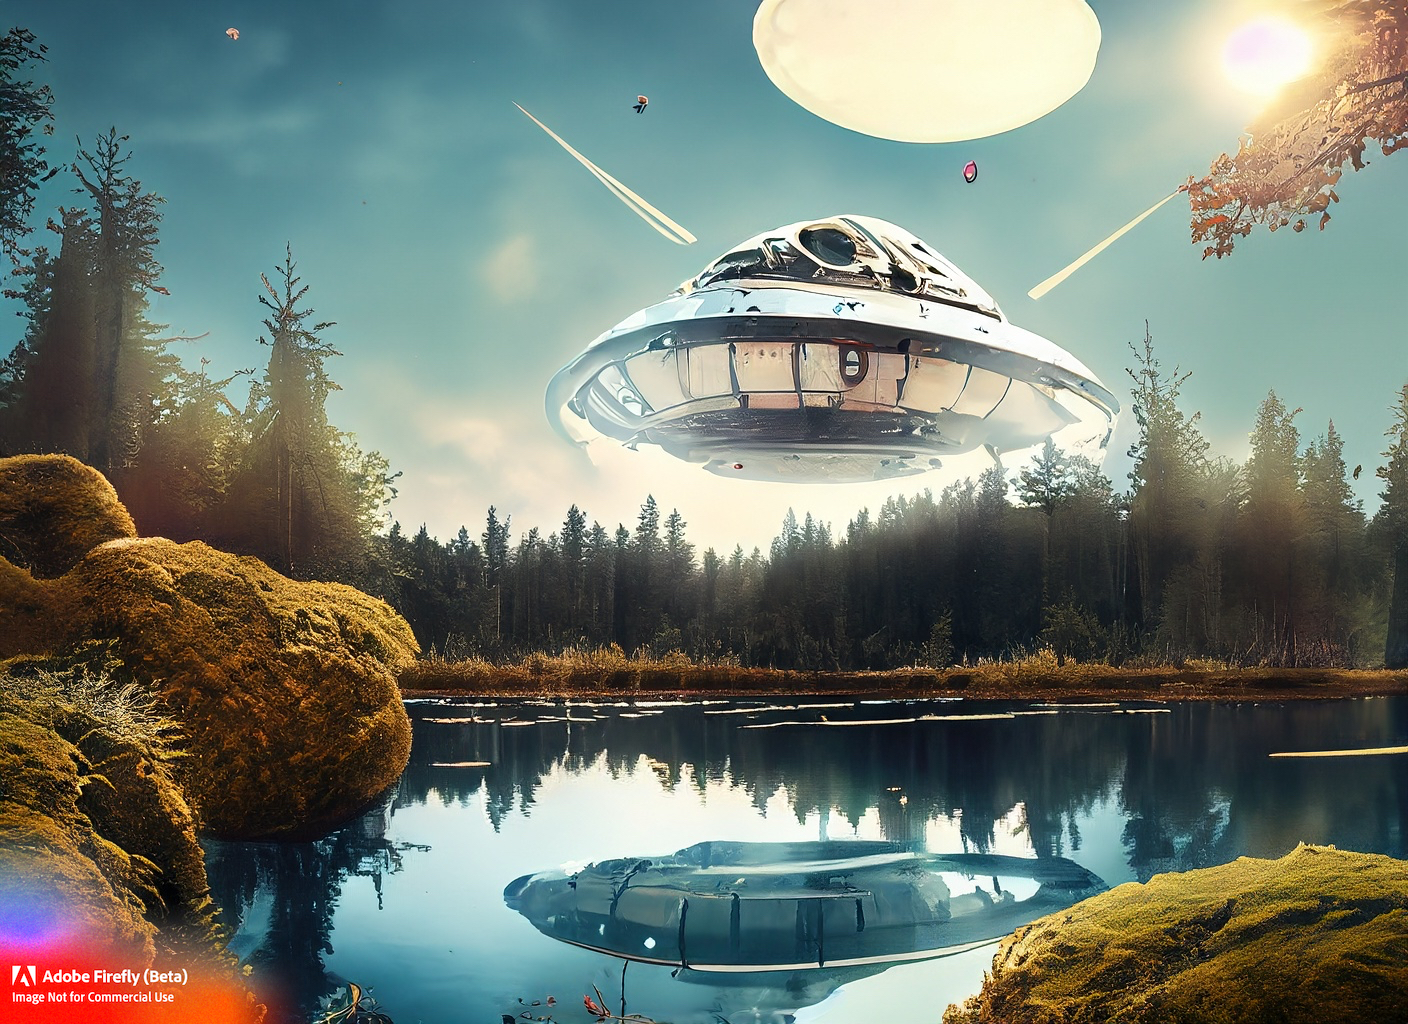 Firefly spaceship hovering in the Scandinavian forest sunny sky spaces